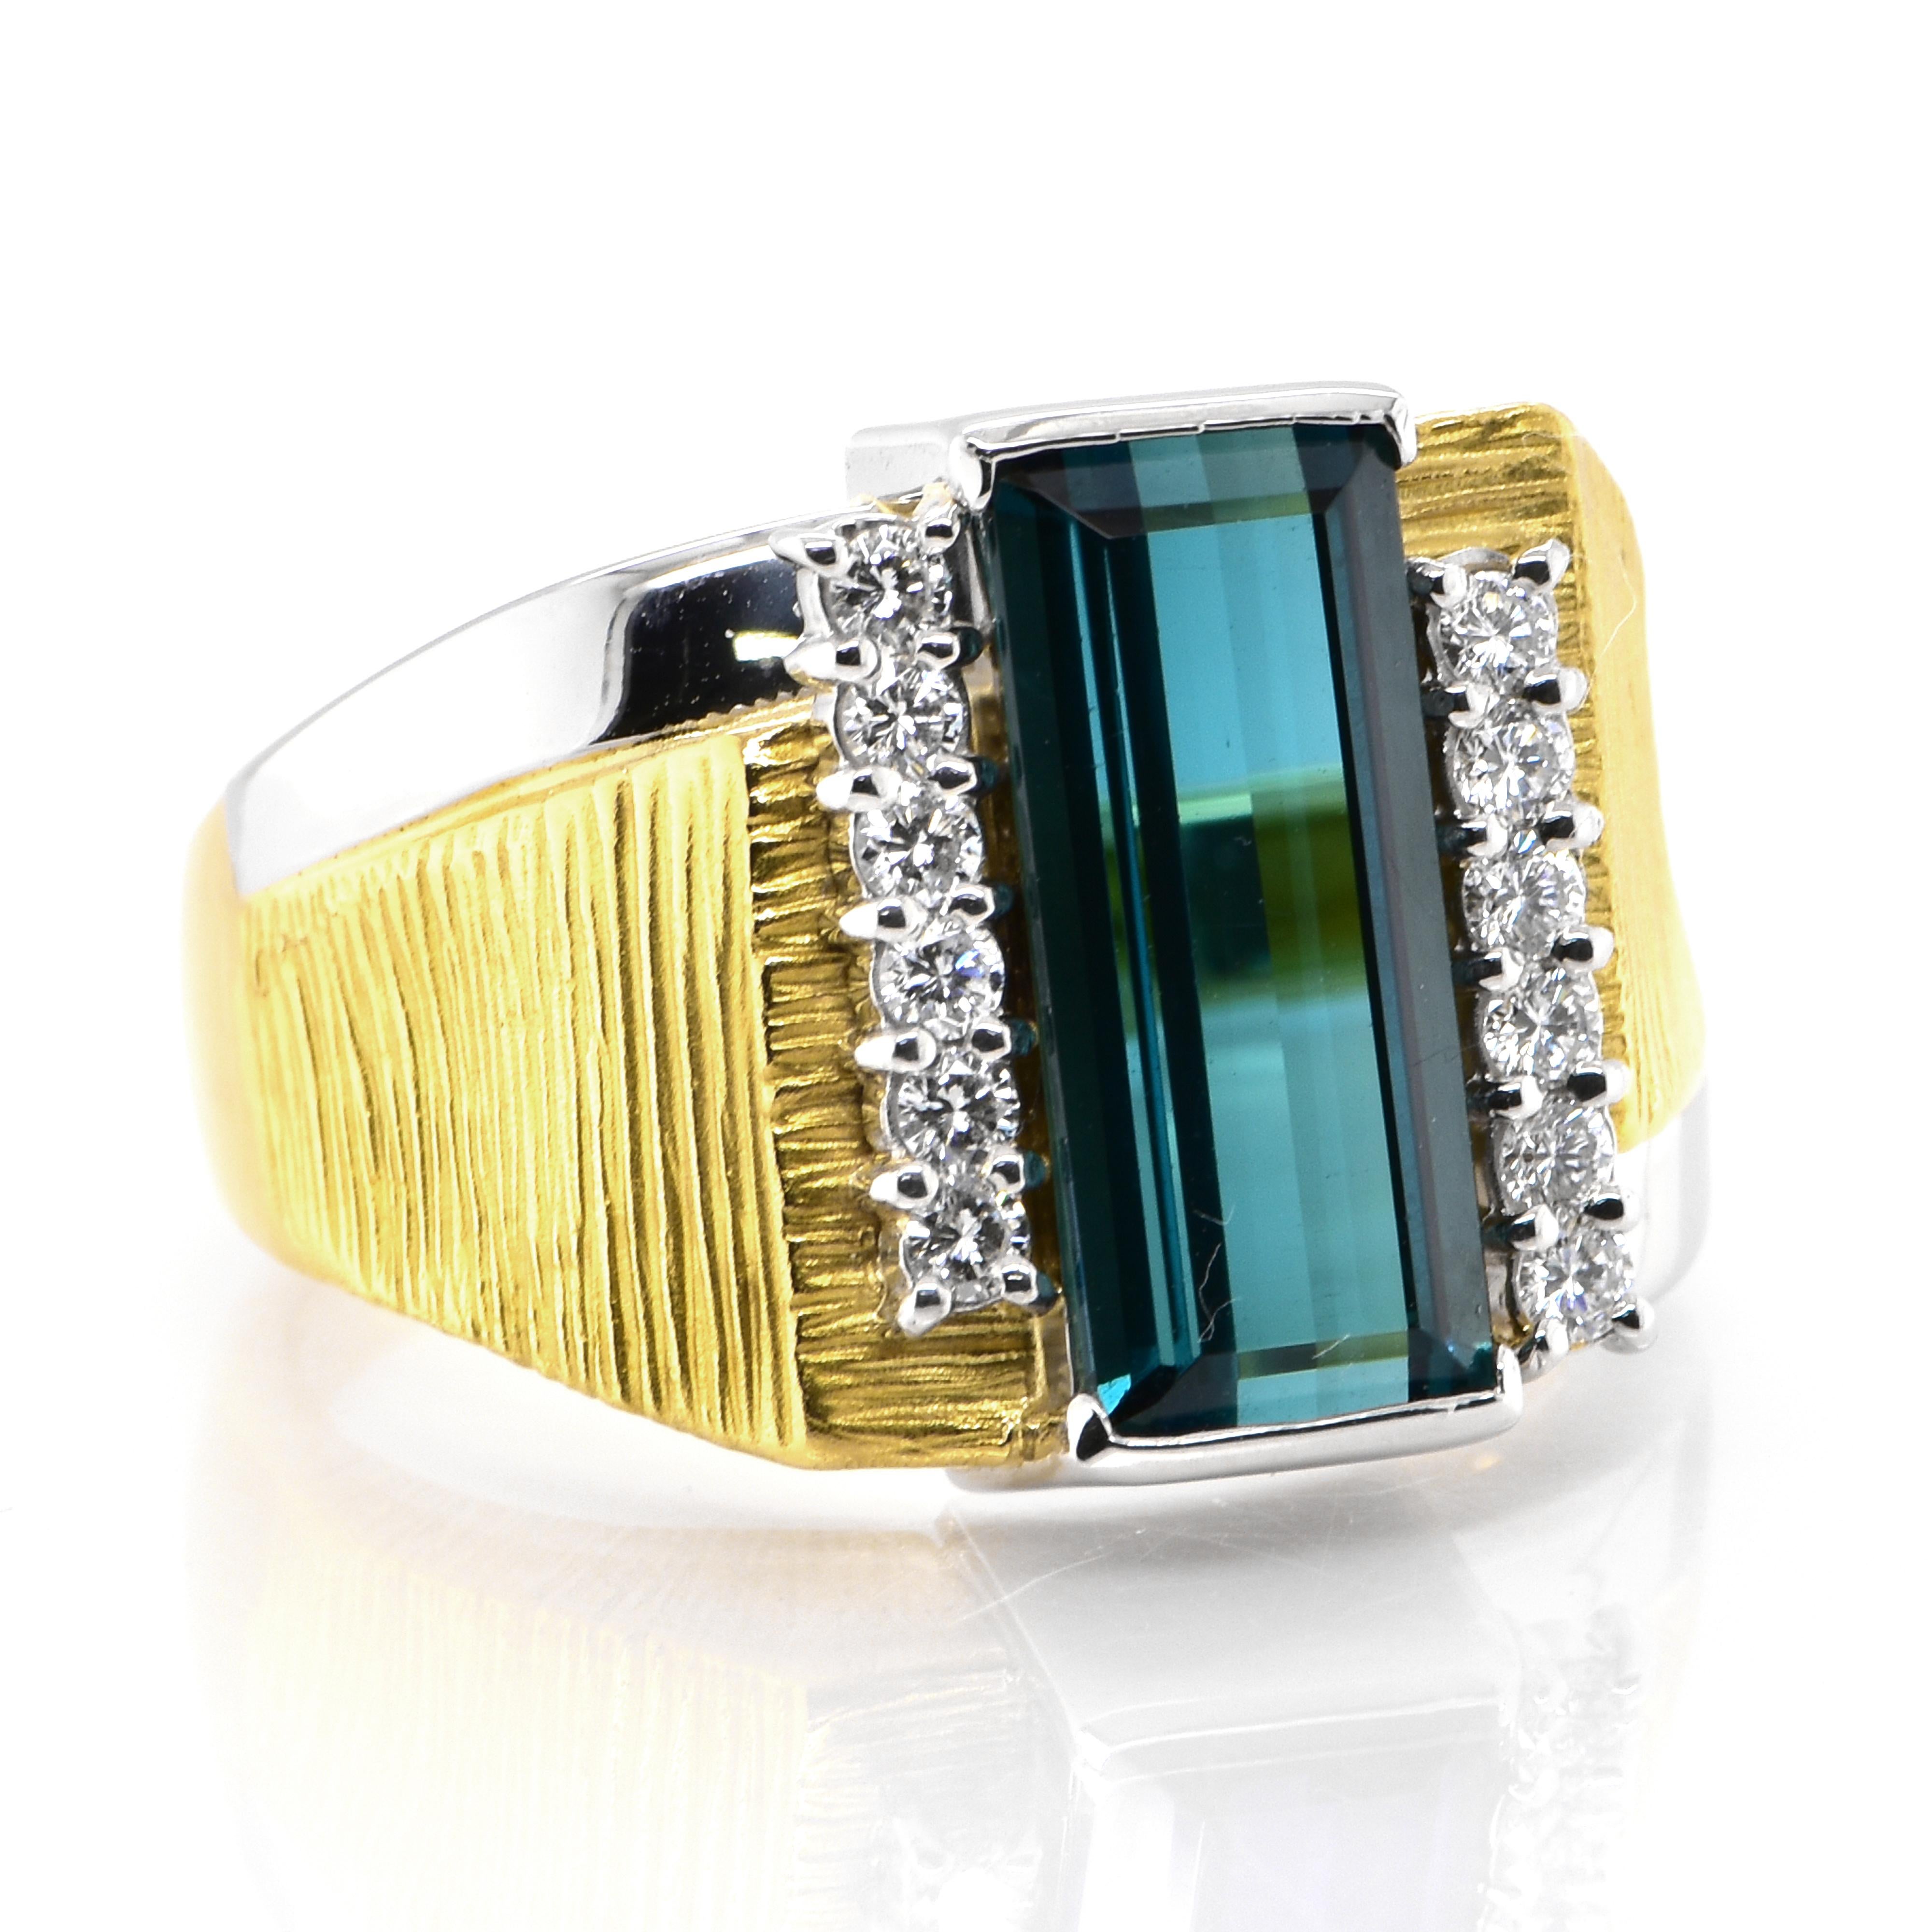 A stunning Cocktail Ring featuring a 5.09 Carat, Natural Indicolite Tourmaline and 0.35 Carats of Diamond Accents set in 18 Karat Yellow Gold and Platinum. Tourmalines were first discovered by Spanish conquistadors in Brazil in 1500s. The name